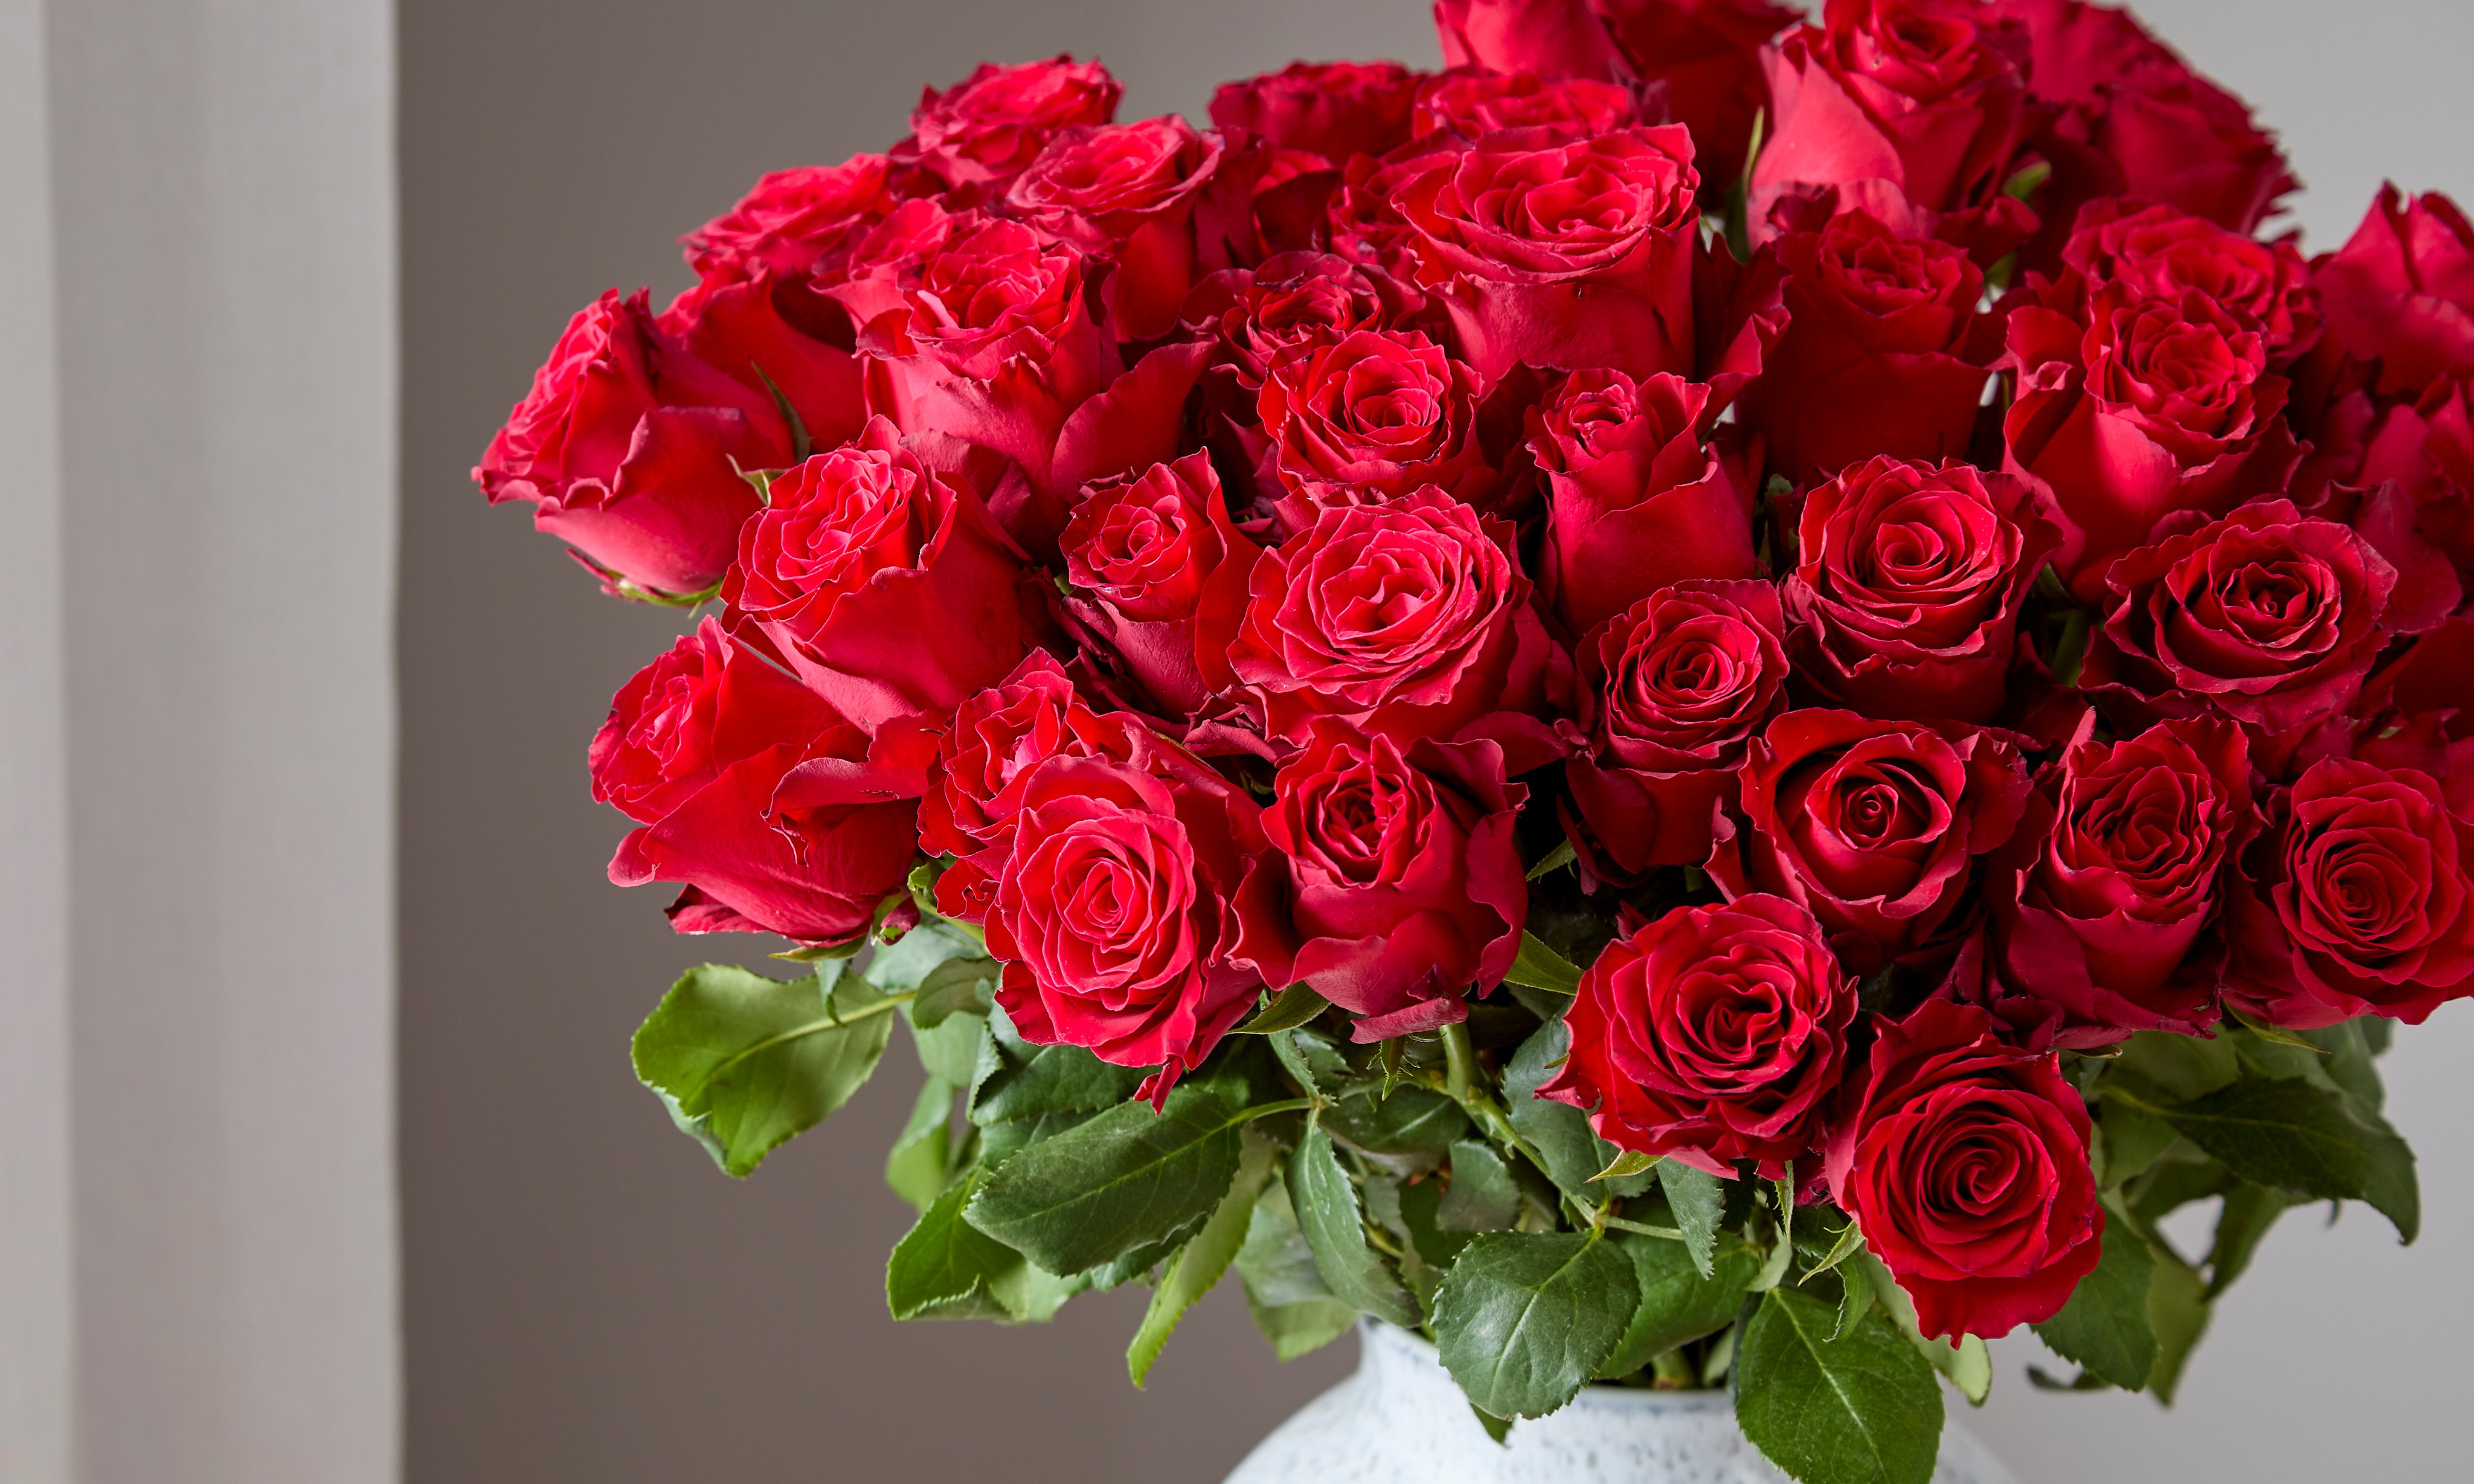 Zing Flowers on Twitter: "Can you go overboard when expressing your  adoration? We don't think so! 😉 Spoil your loved one with this incredible  bouquet of 48 beautiful red roses - an